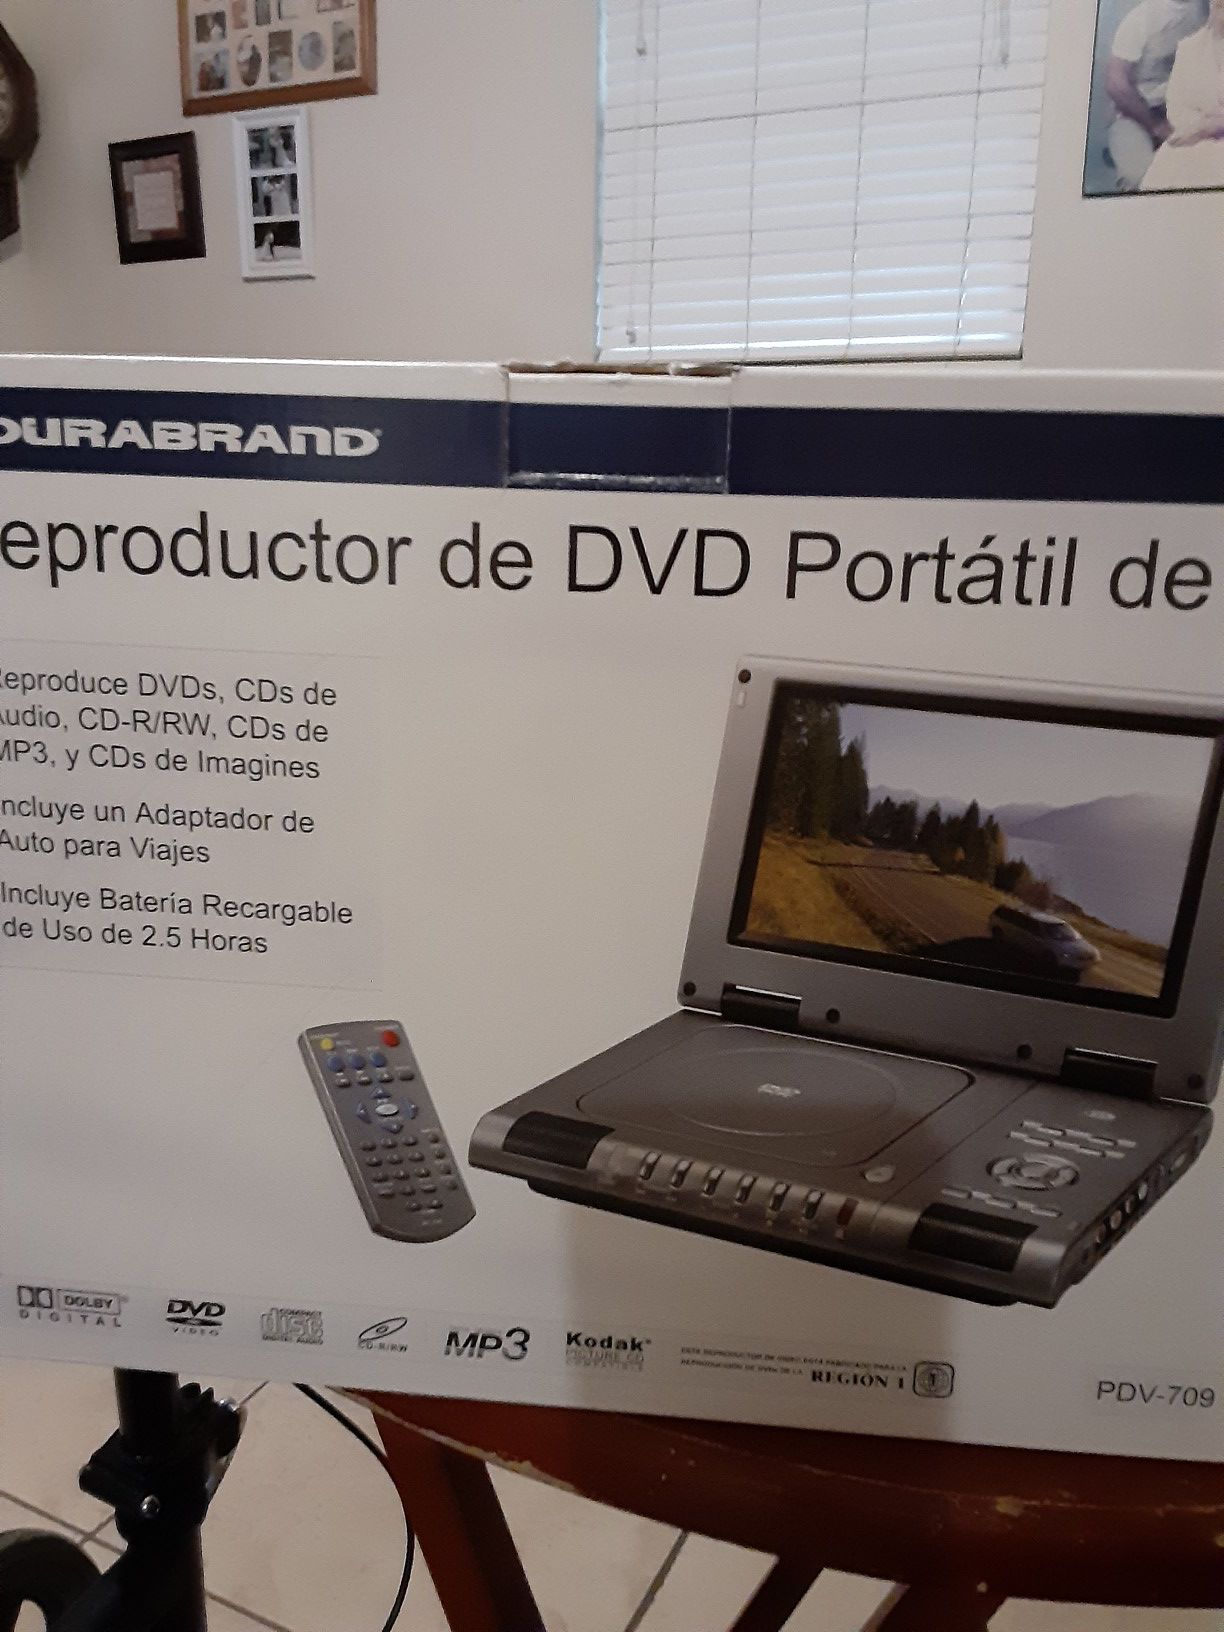 Portable DVD player 9",Durabrand in box.new